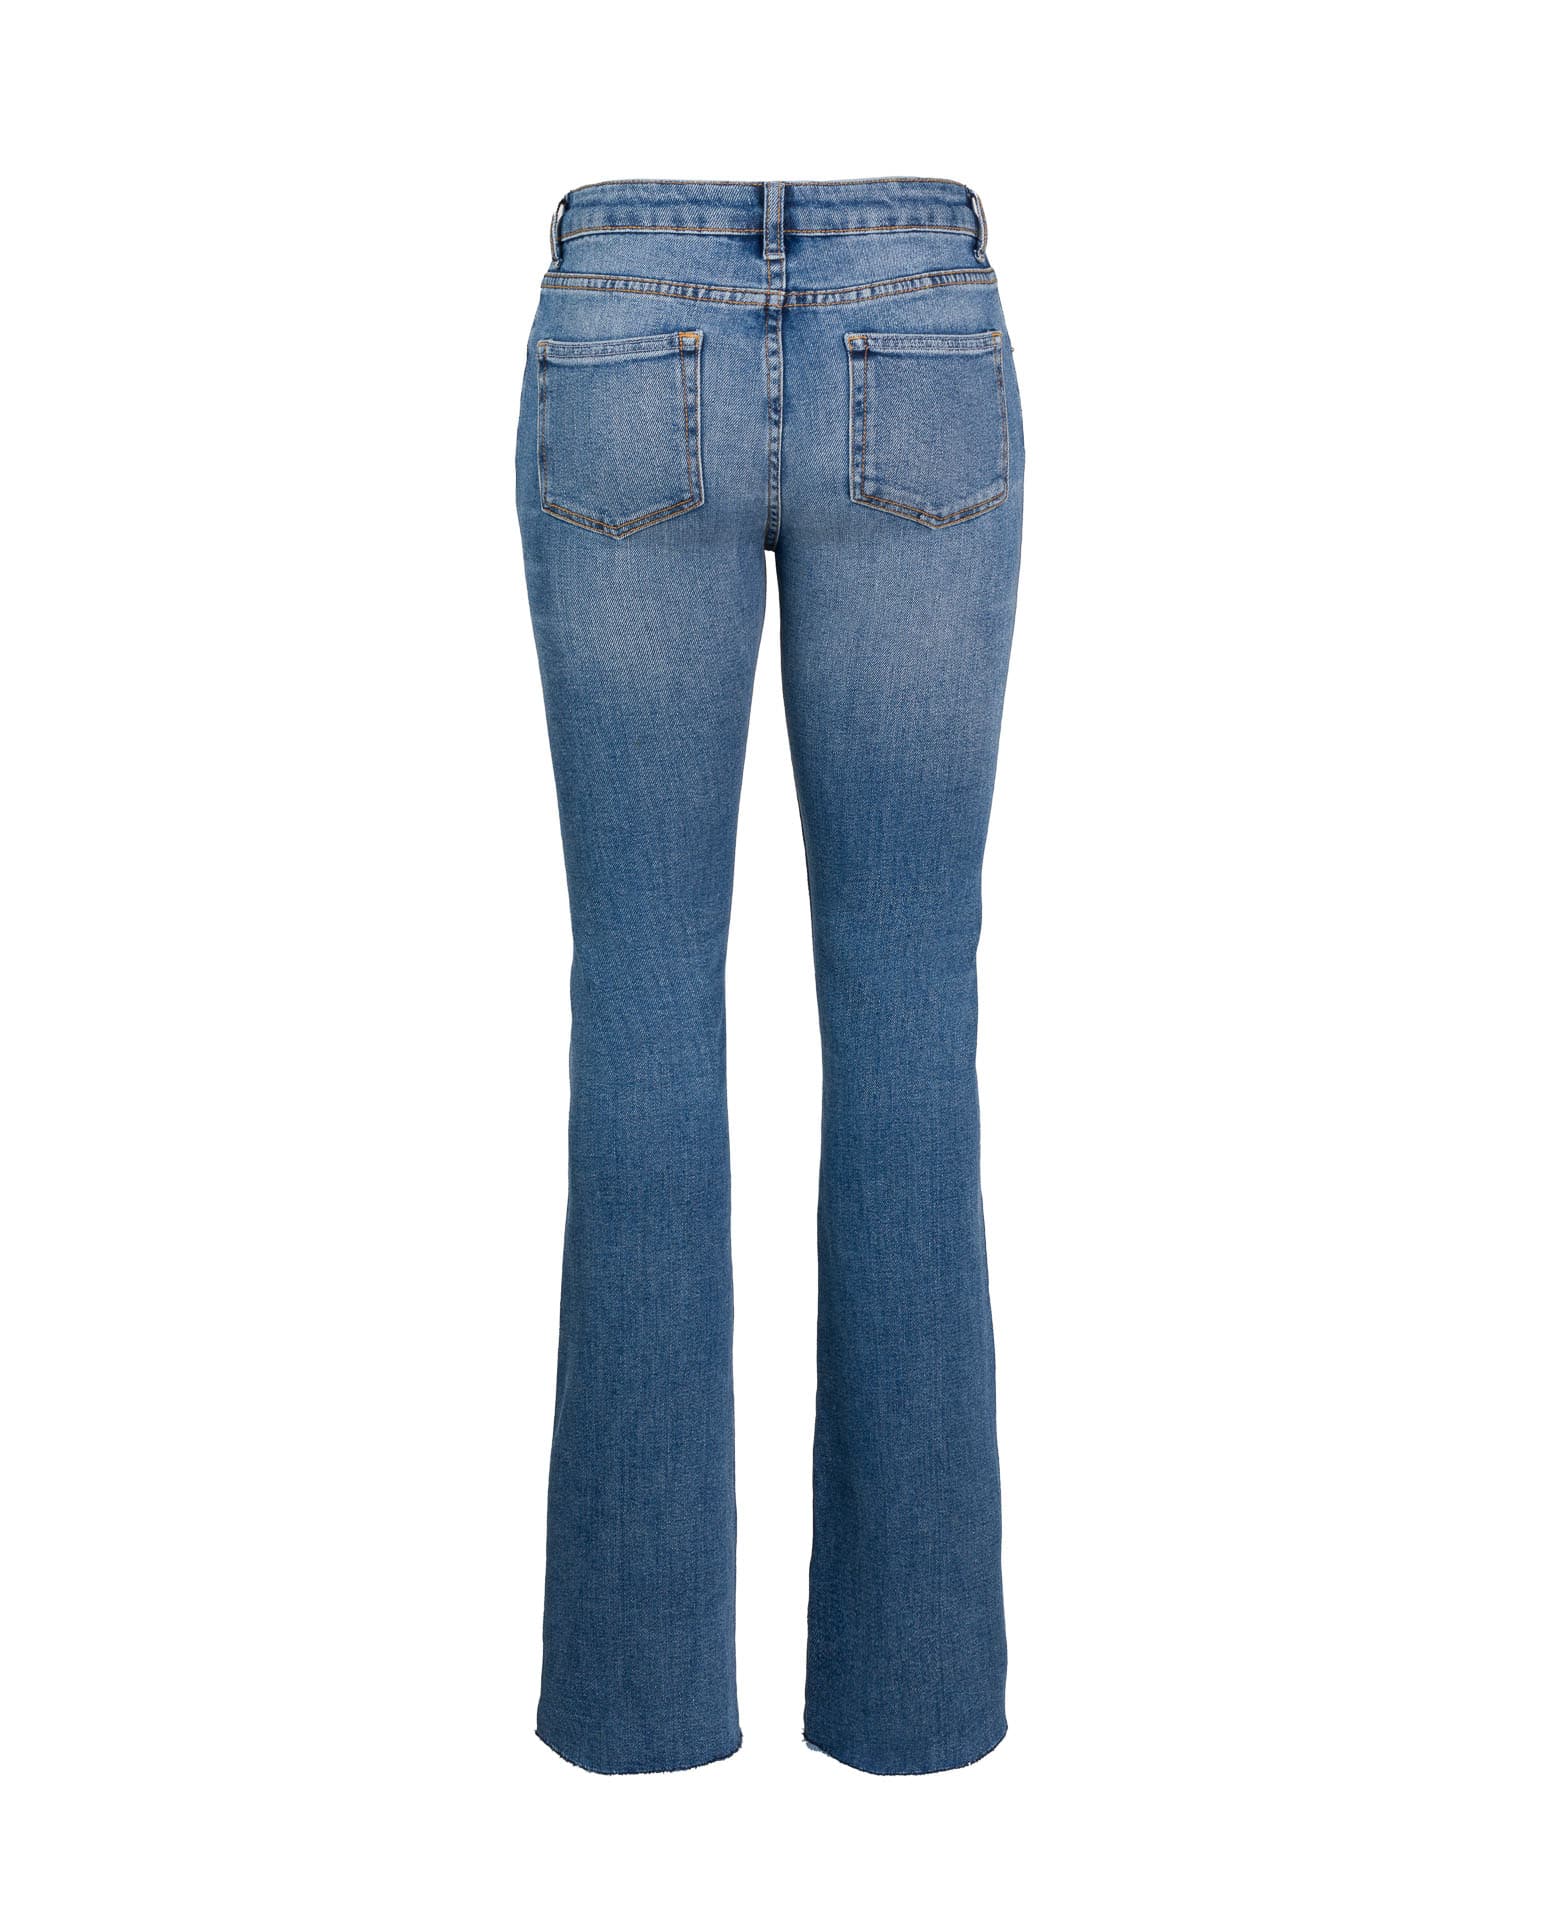 CARO FLARE JEANS - Buy online at Marina Anouilh Gstaad